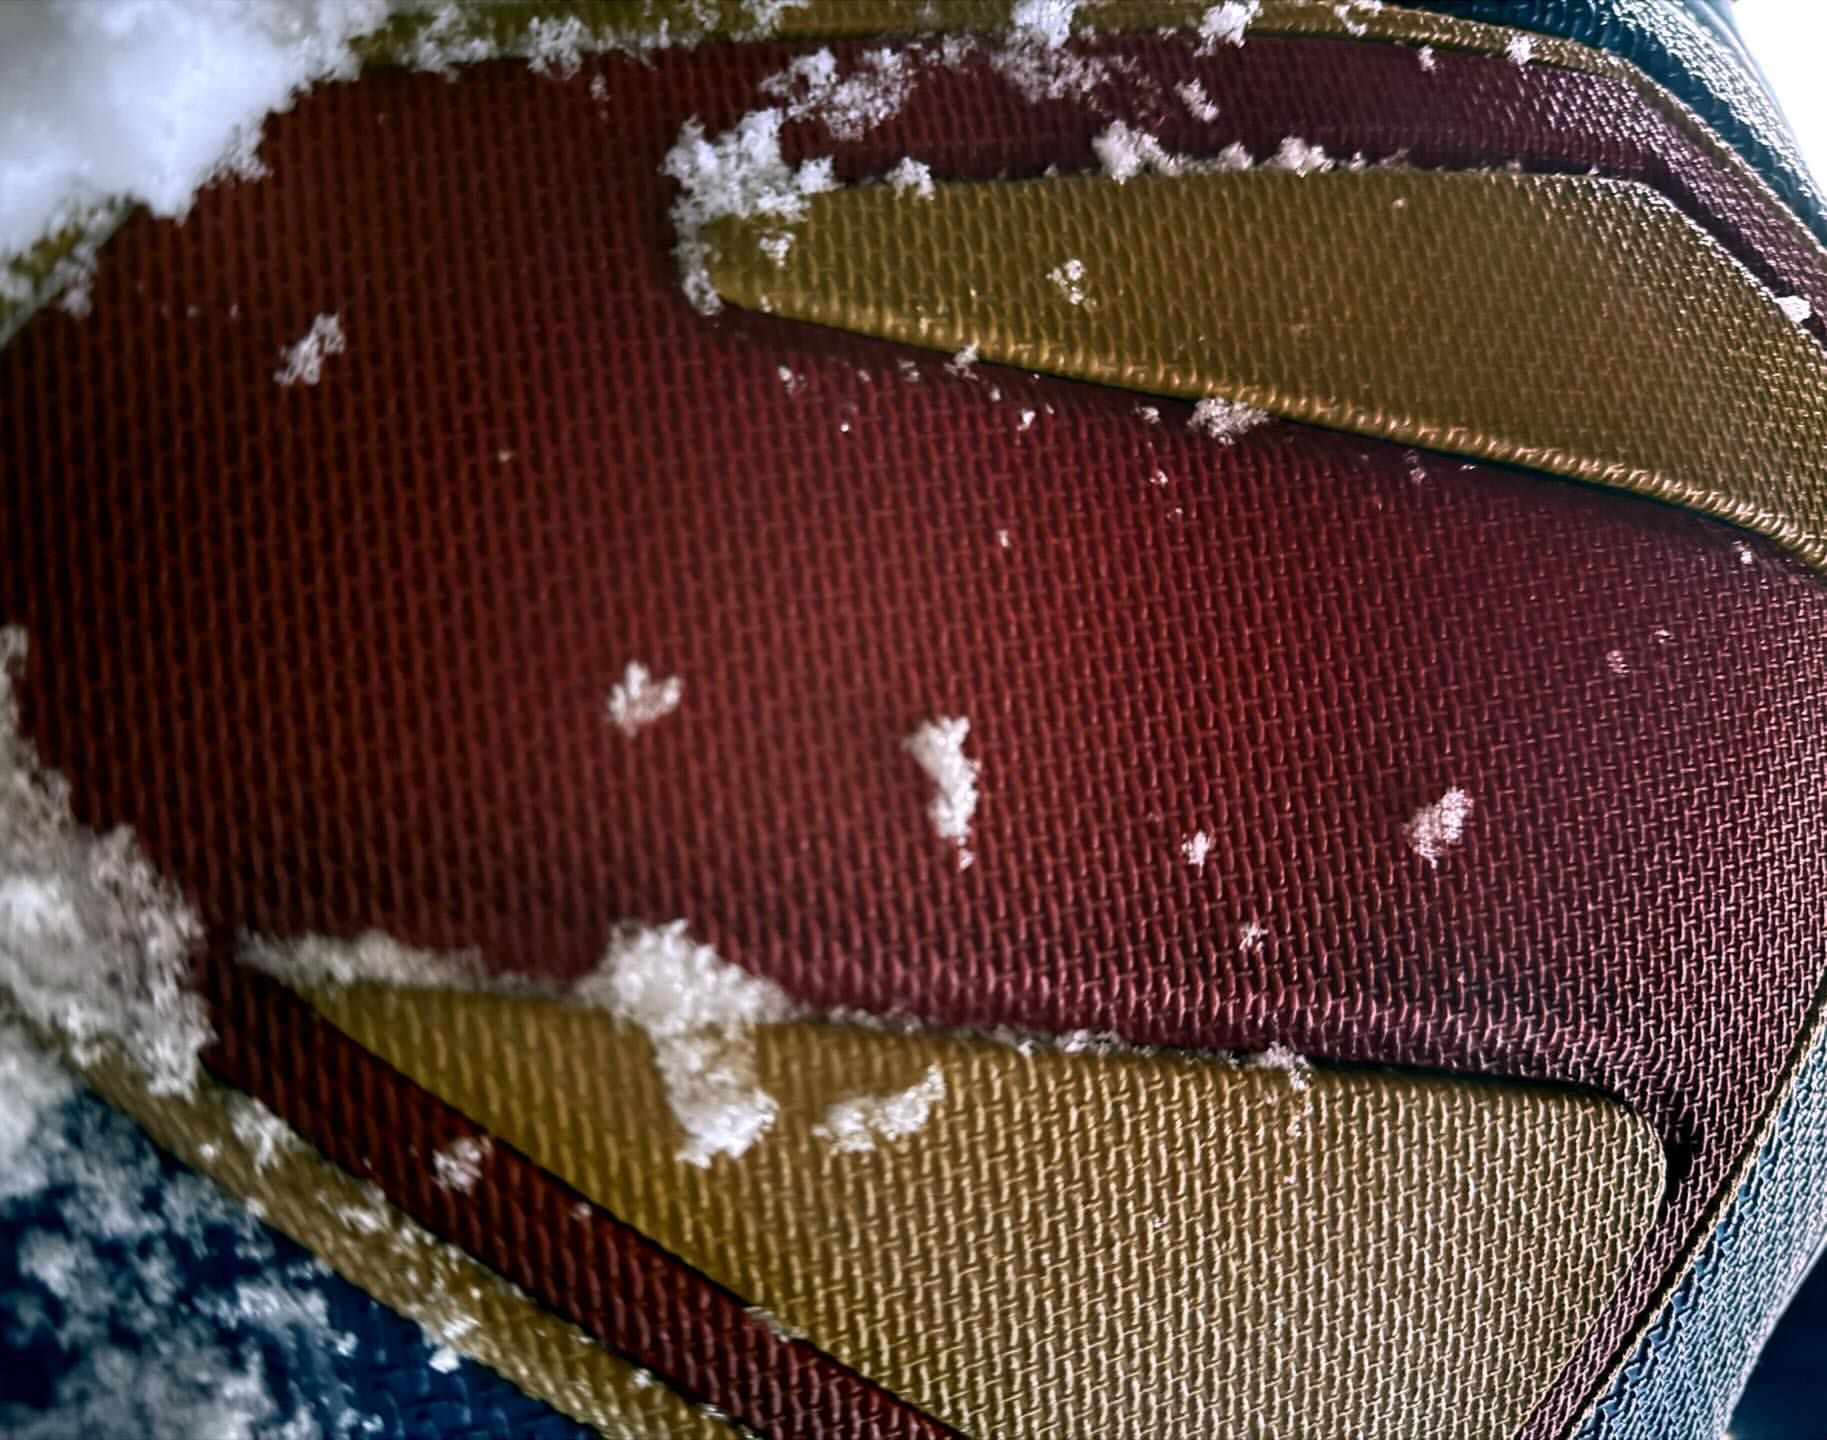 A close up of the new Superman shield covered in snow